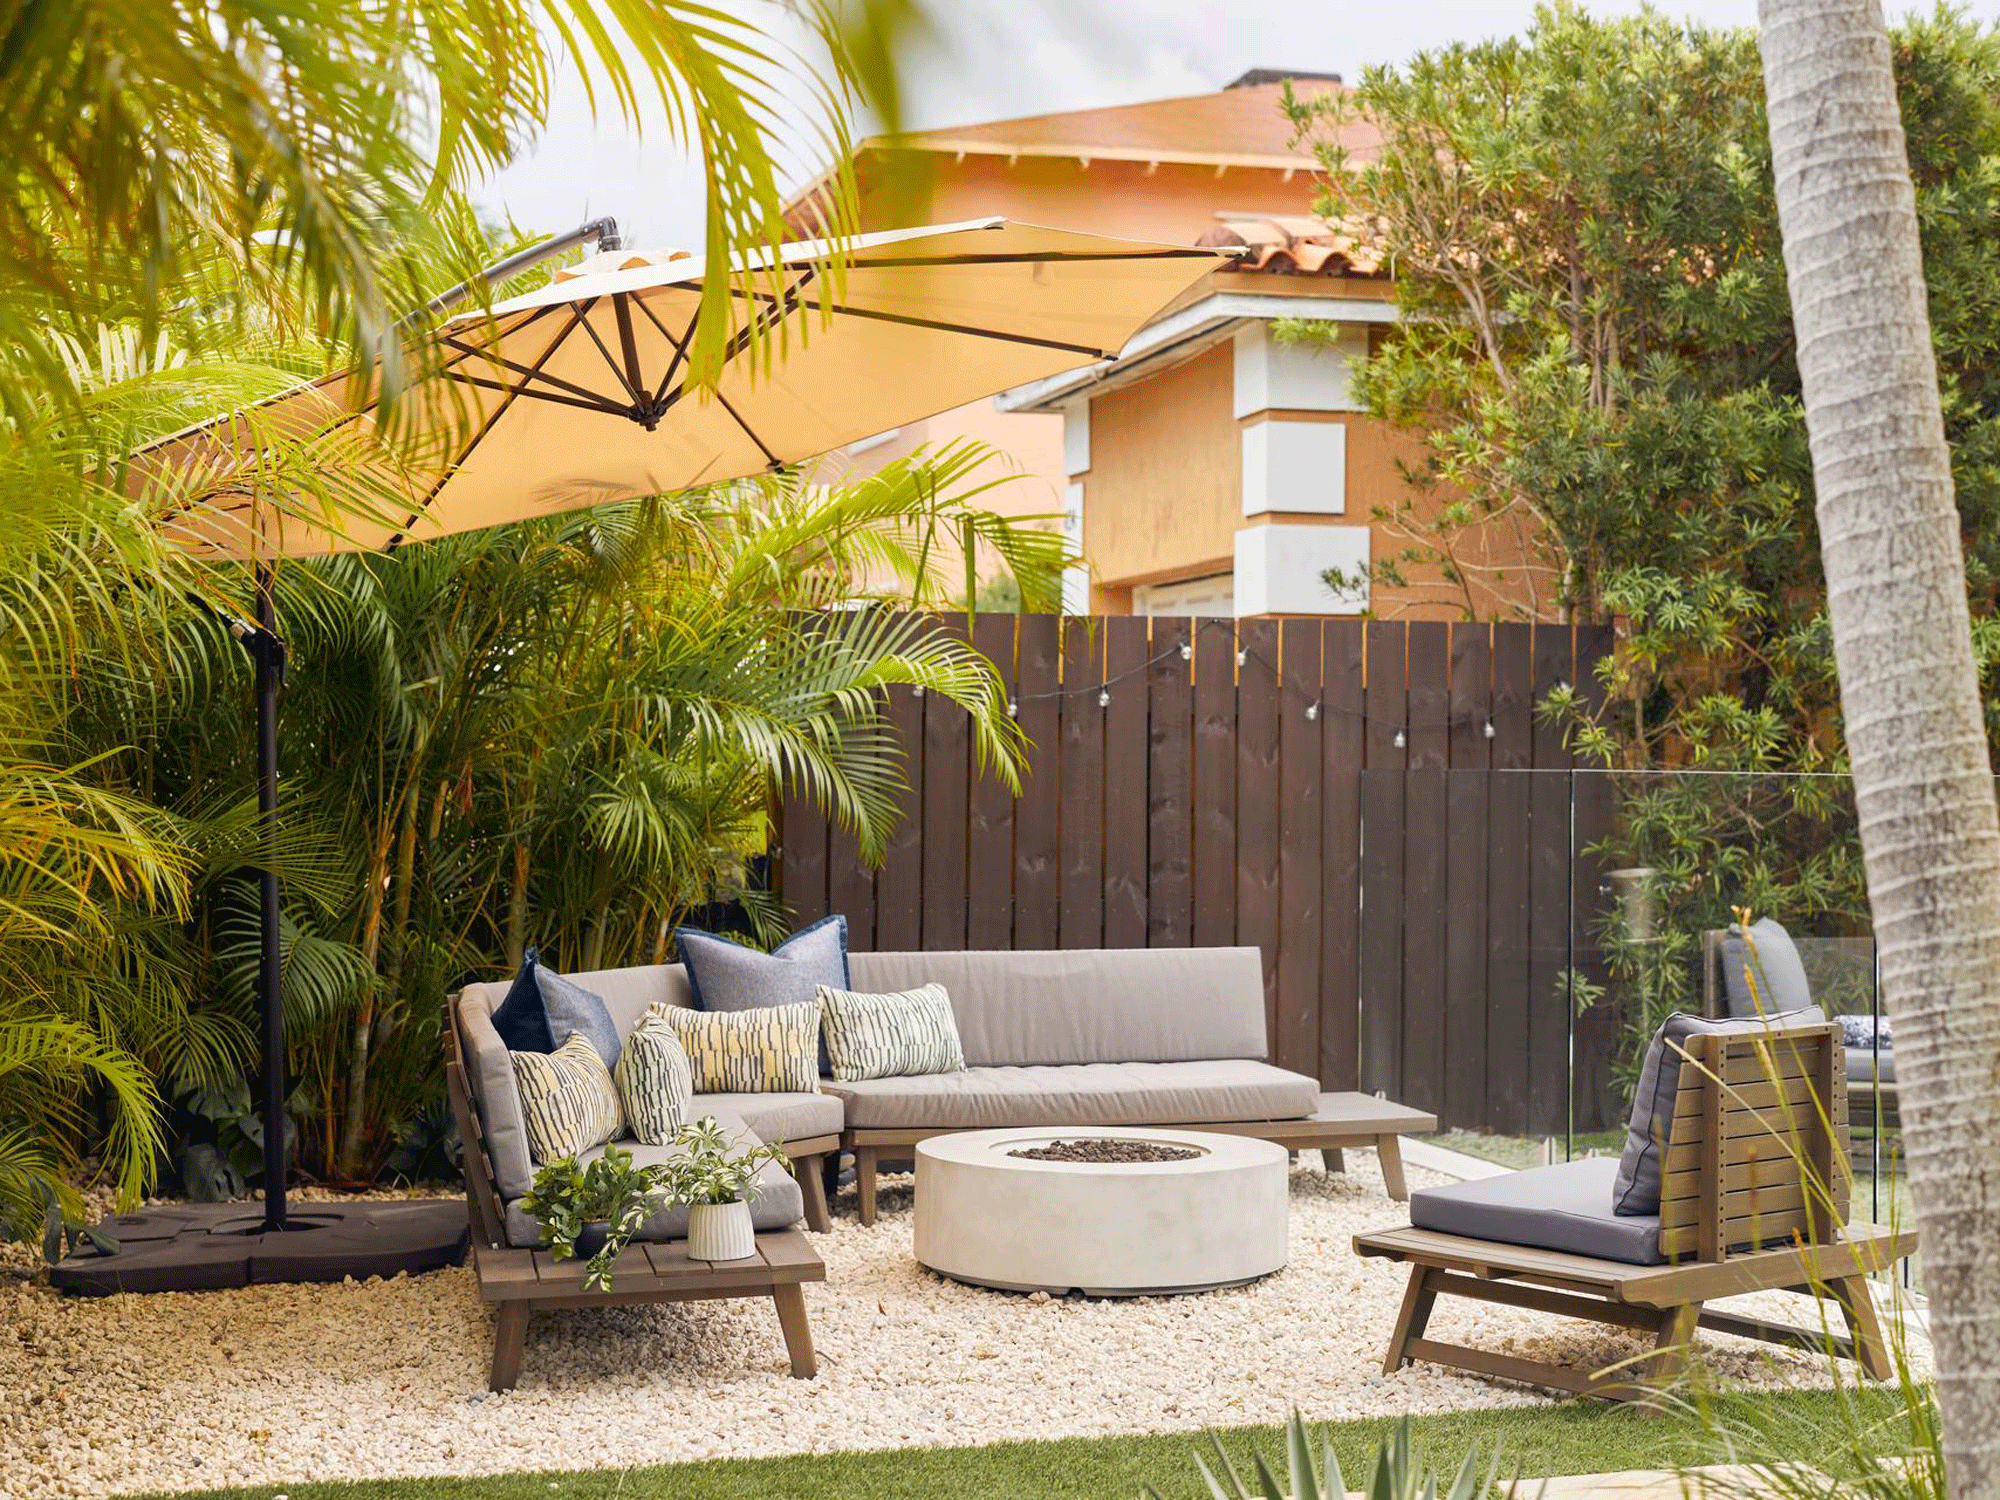 backyard with sofa, chairs, table, parasol and fire pit